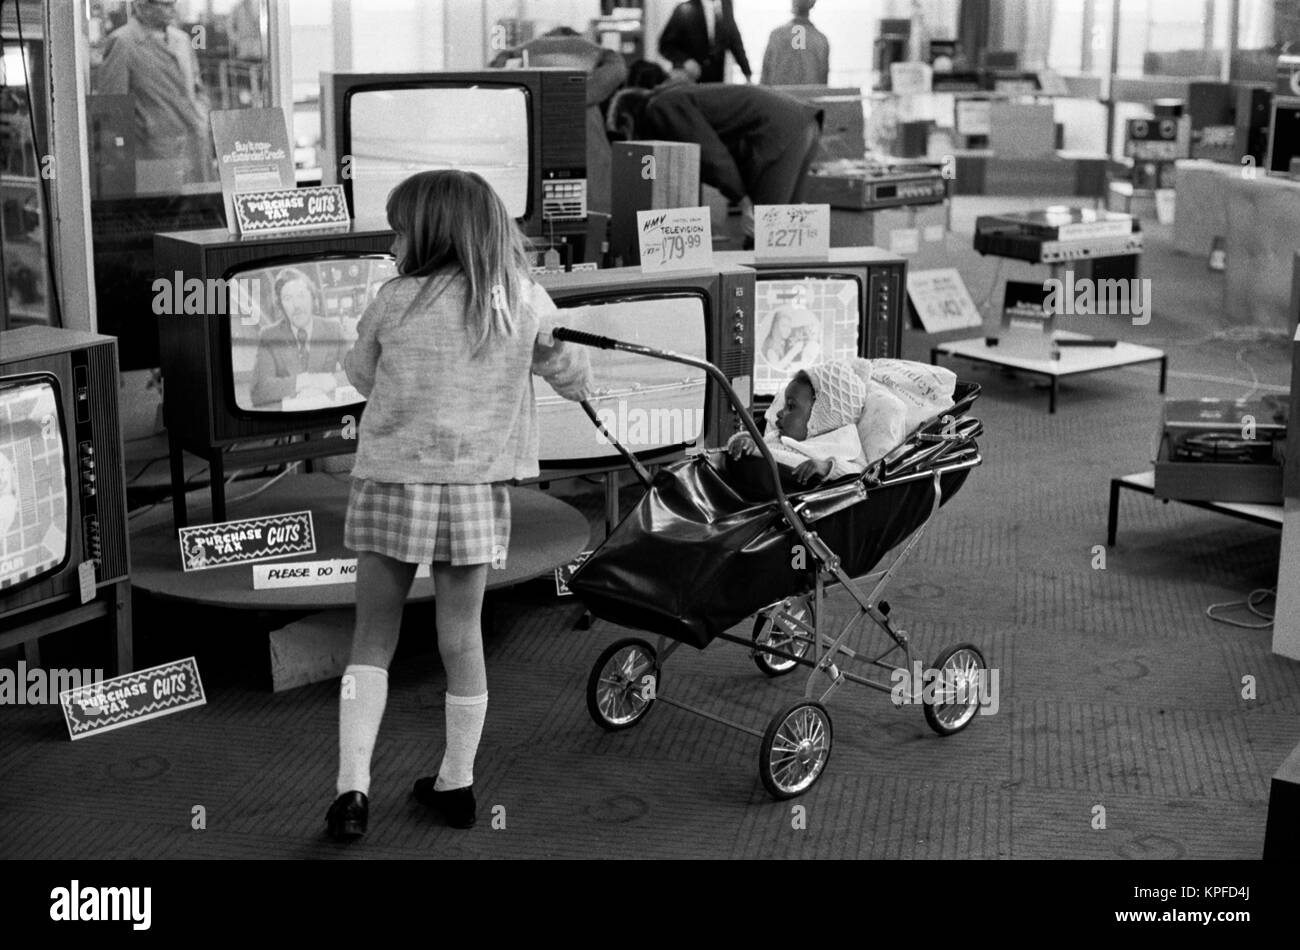 Multi ethnic Britain 1970s, white girls pushing black British baby in a pram around a department store London 1972. Uk department store selling televisions Signs say 'Purchase Tax Cuts'. Dickie Davies ITV World of Sport TV presenter is on the telly. HOMER SYKES Stock Photo